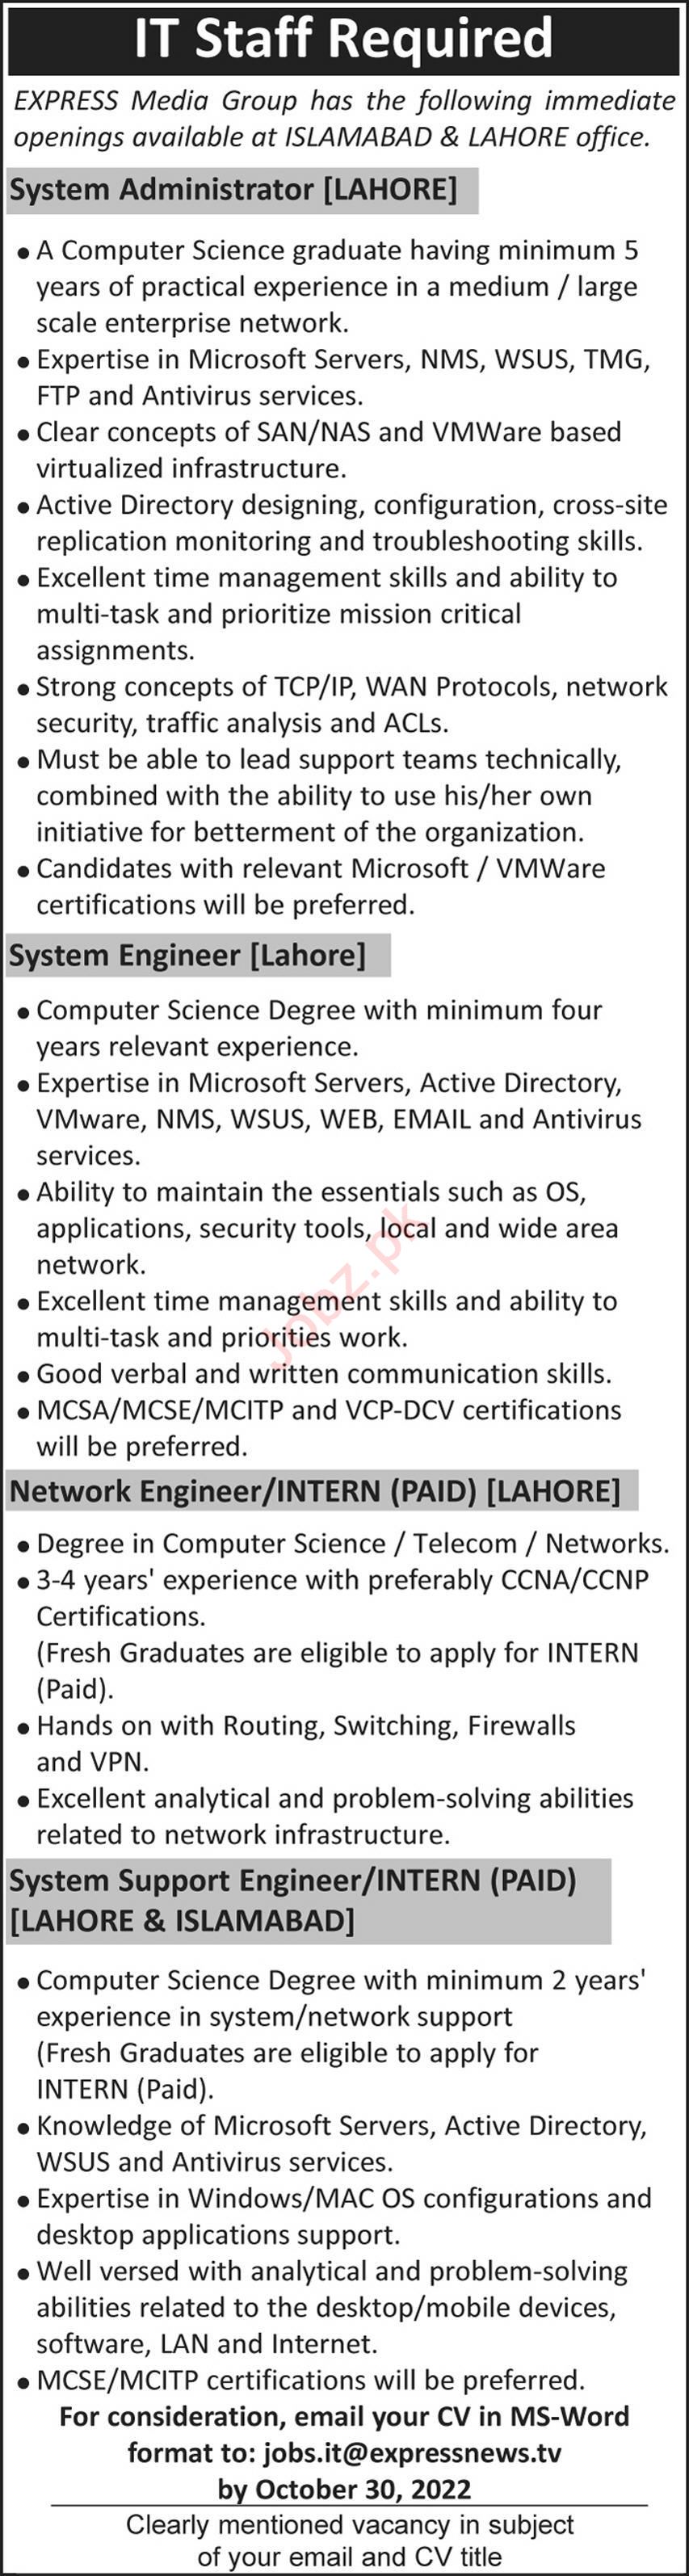 Latest Express Media Group job opportunities